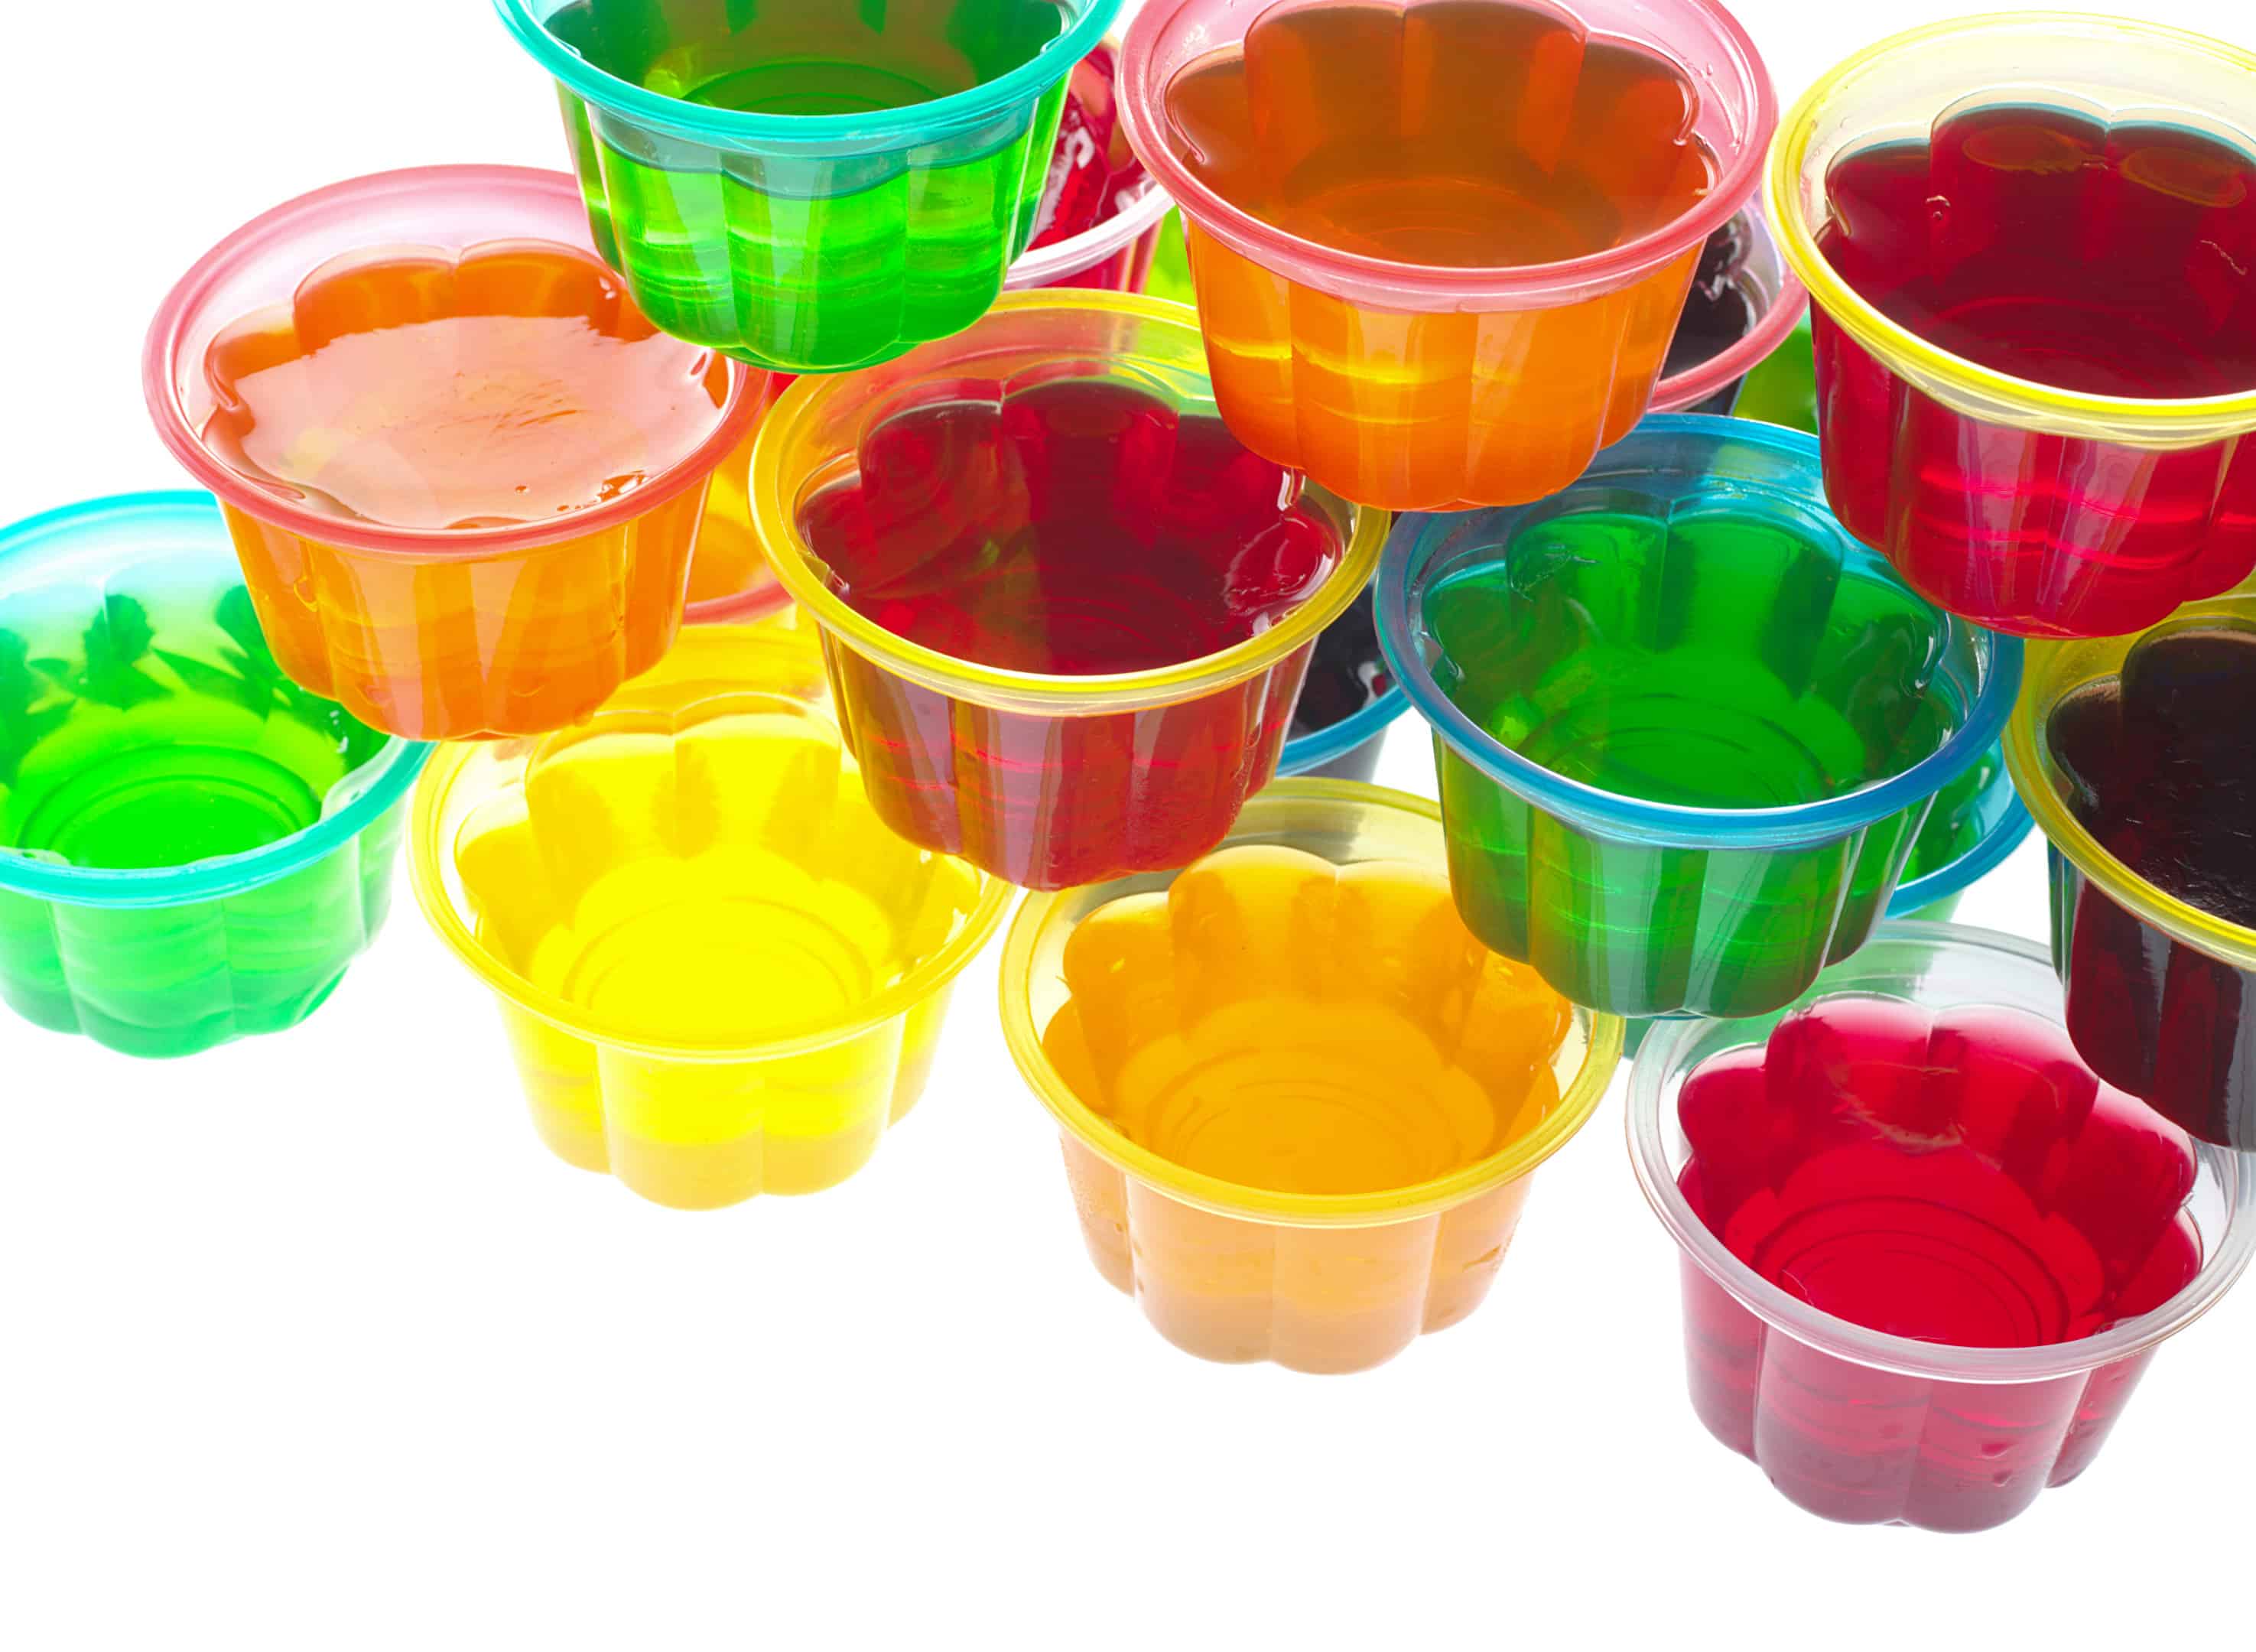 Colorful jellies in plastic bowls arranged in a pile and photographed from above